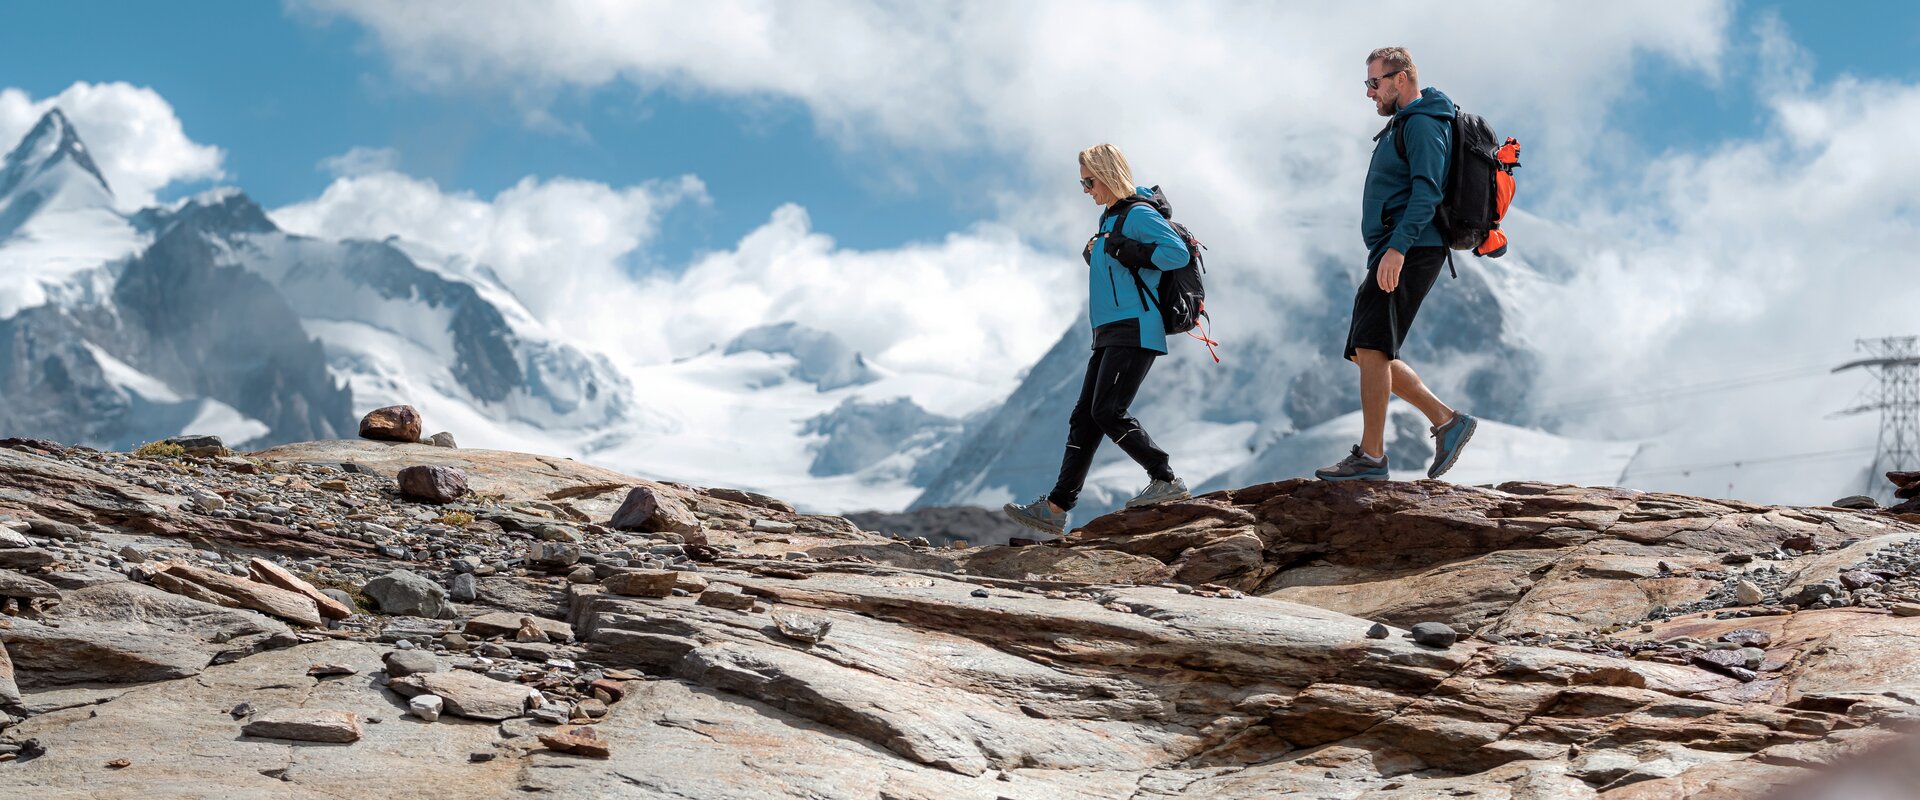 Two people hiking over rocks, the Zermatt mountains in the background | © basic_home